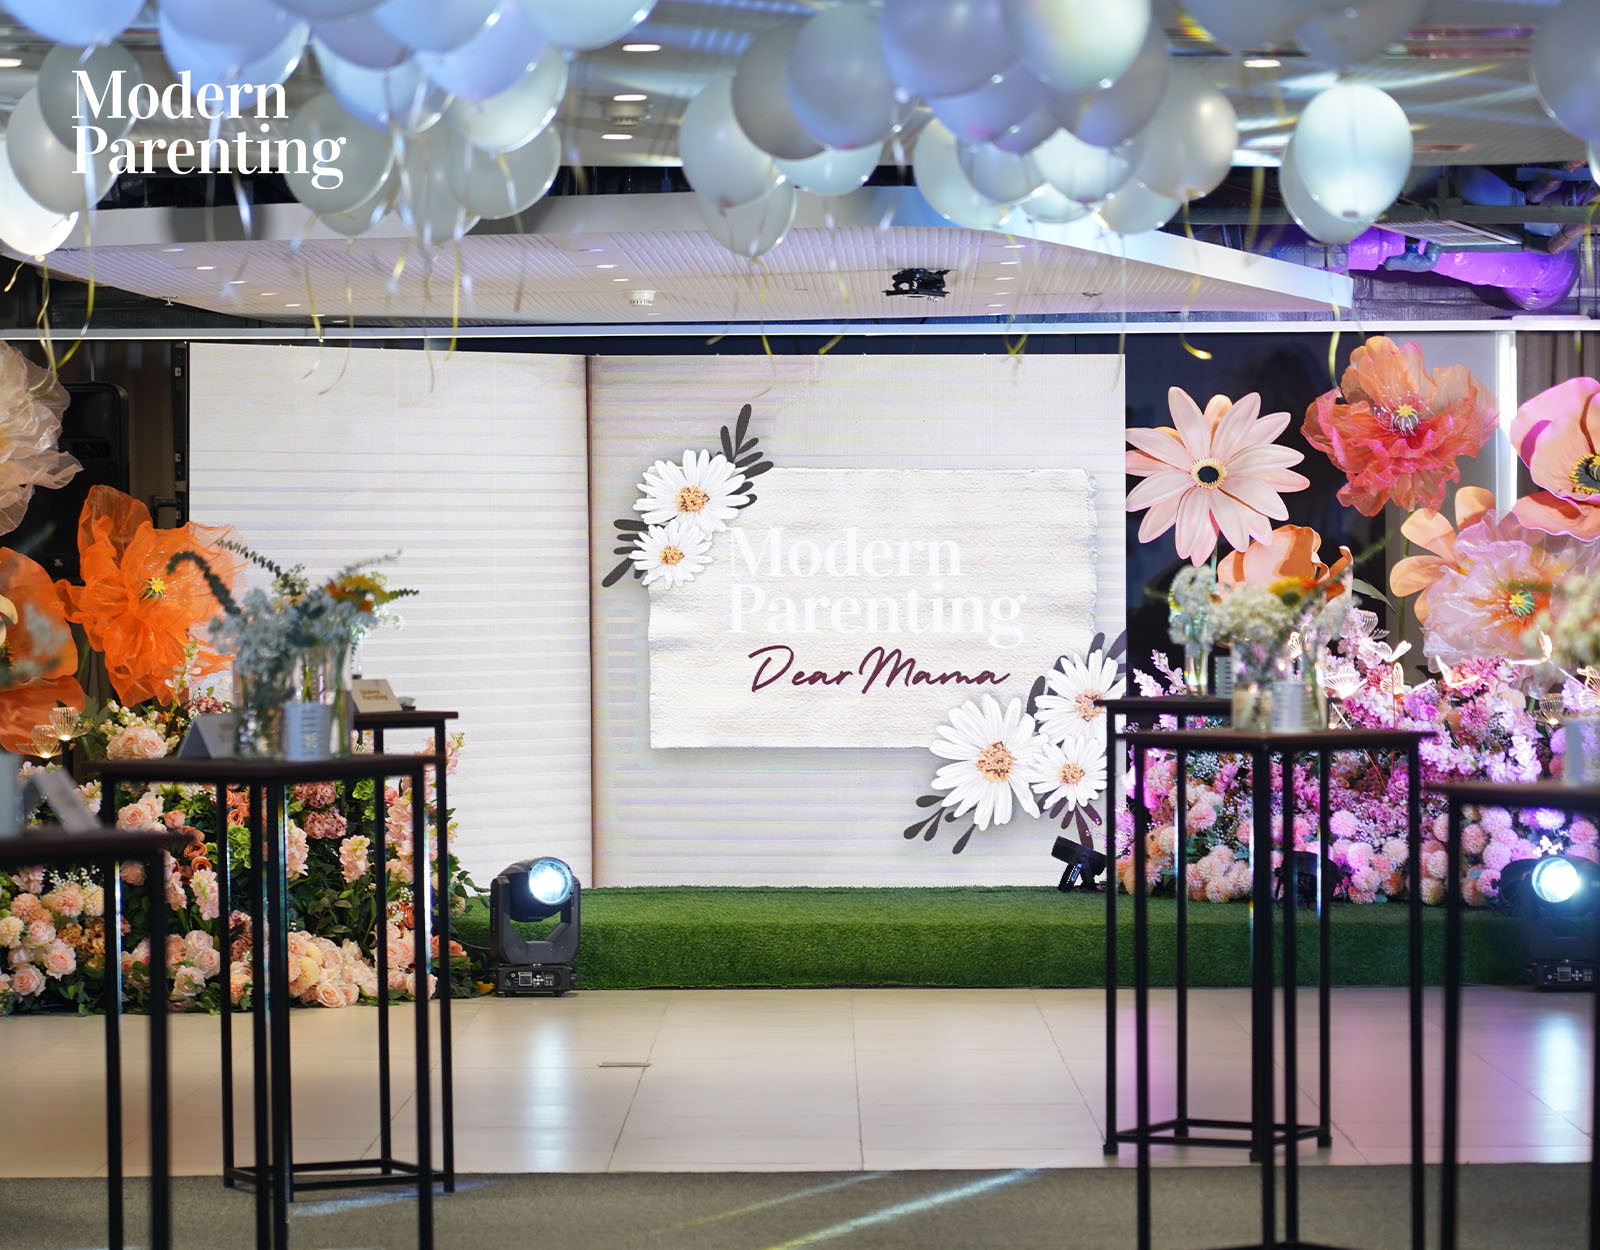 Modern Parenting Dear Mama event, held in partnership with Brittany Hotel BGC